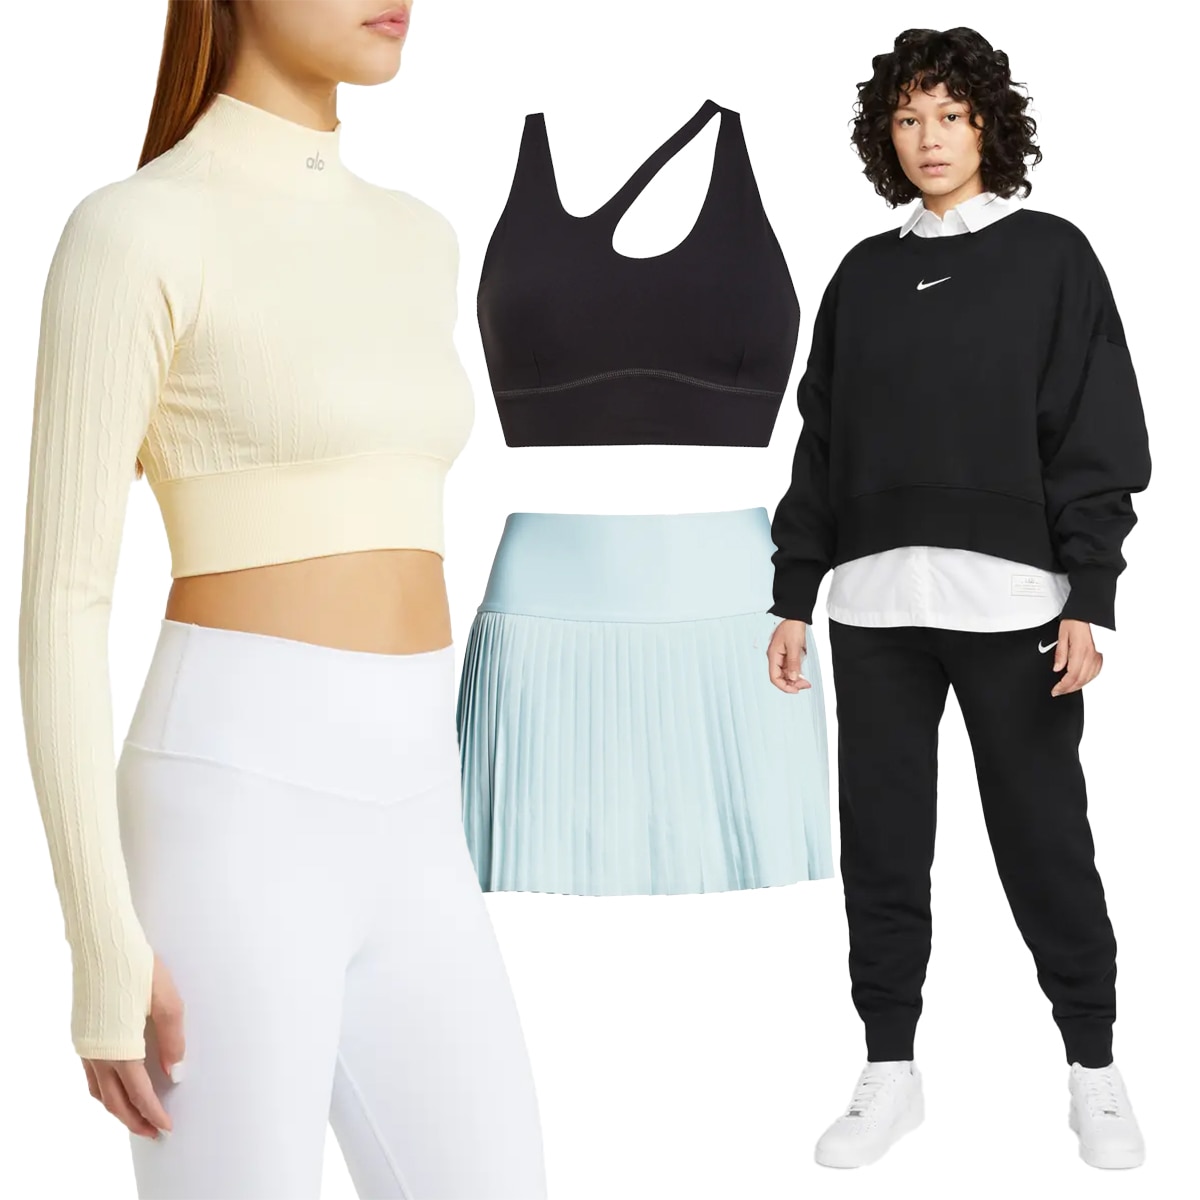 Nordstrom Just Dropped the Cutest Activewear From Your Favorite Brands